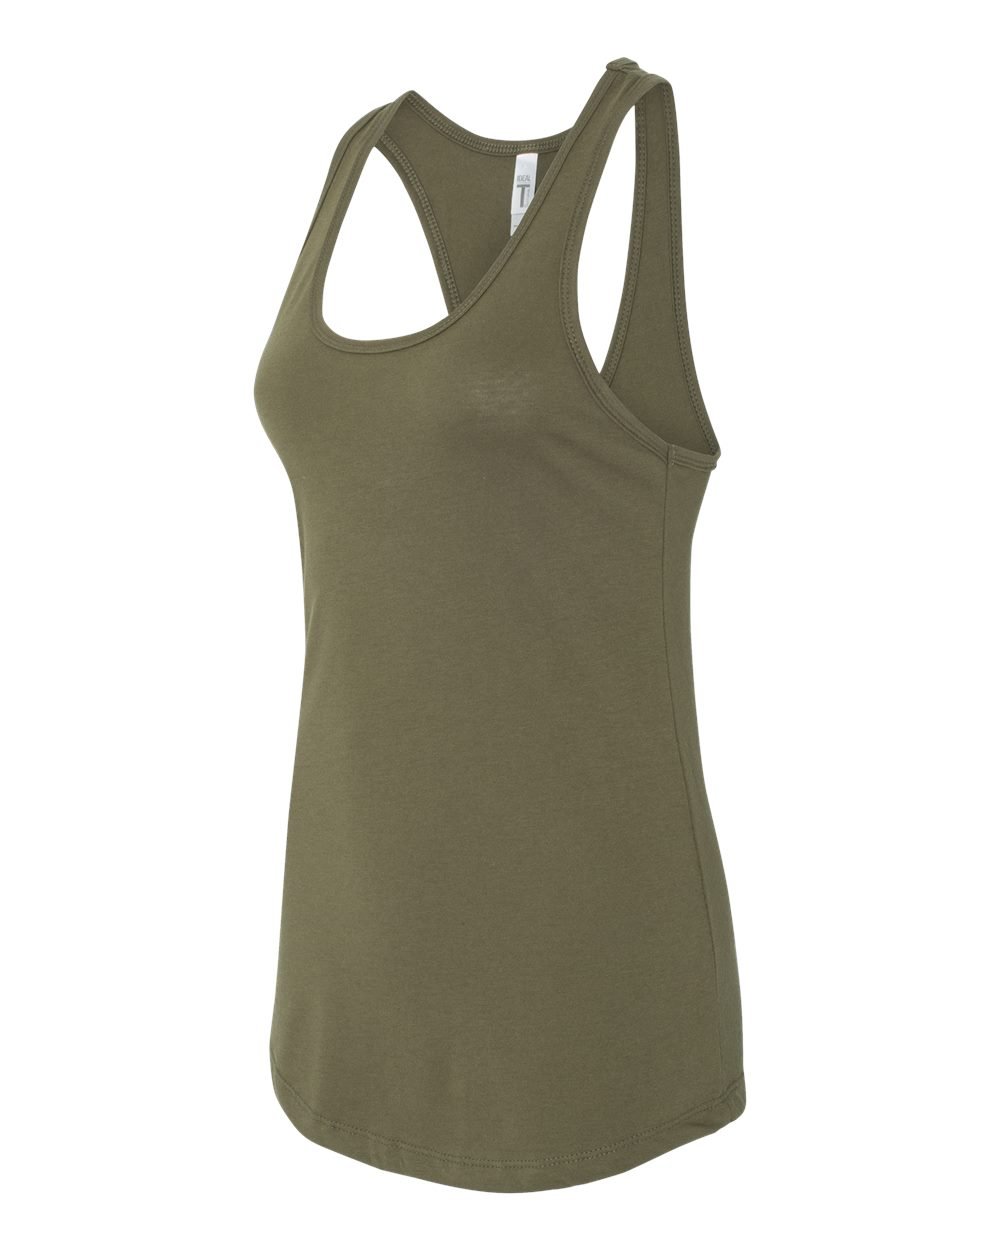 Next Level Ideal Racerback Tank Military Green X-Large (Pack of 5)